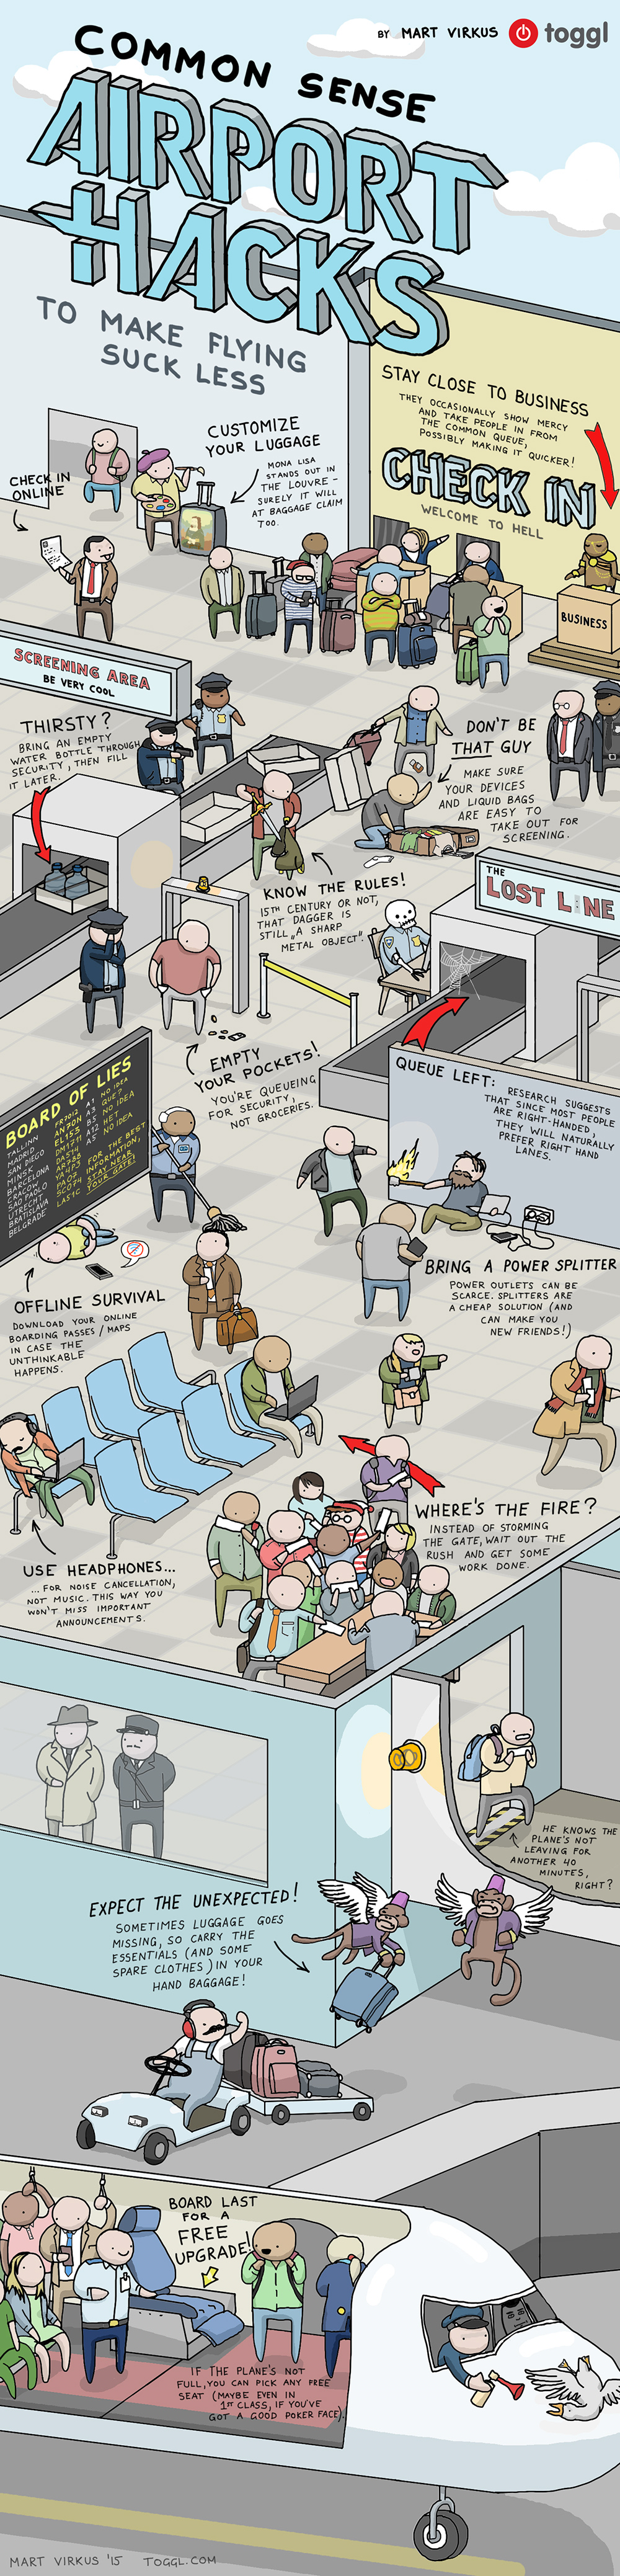 airport-hacks-infographic-toggl-blog